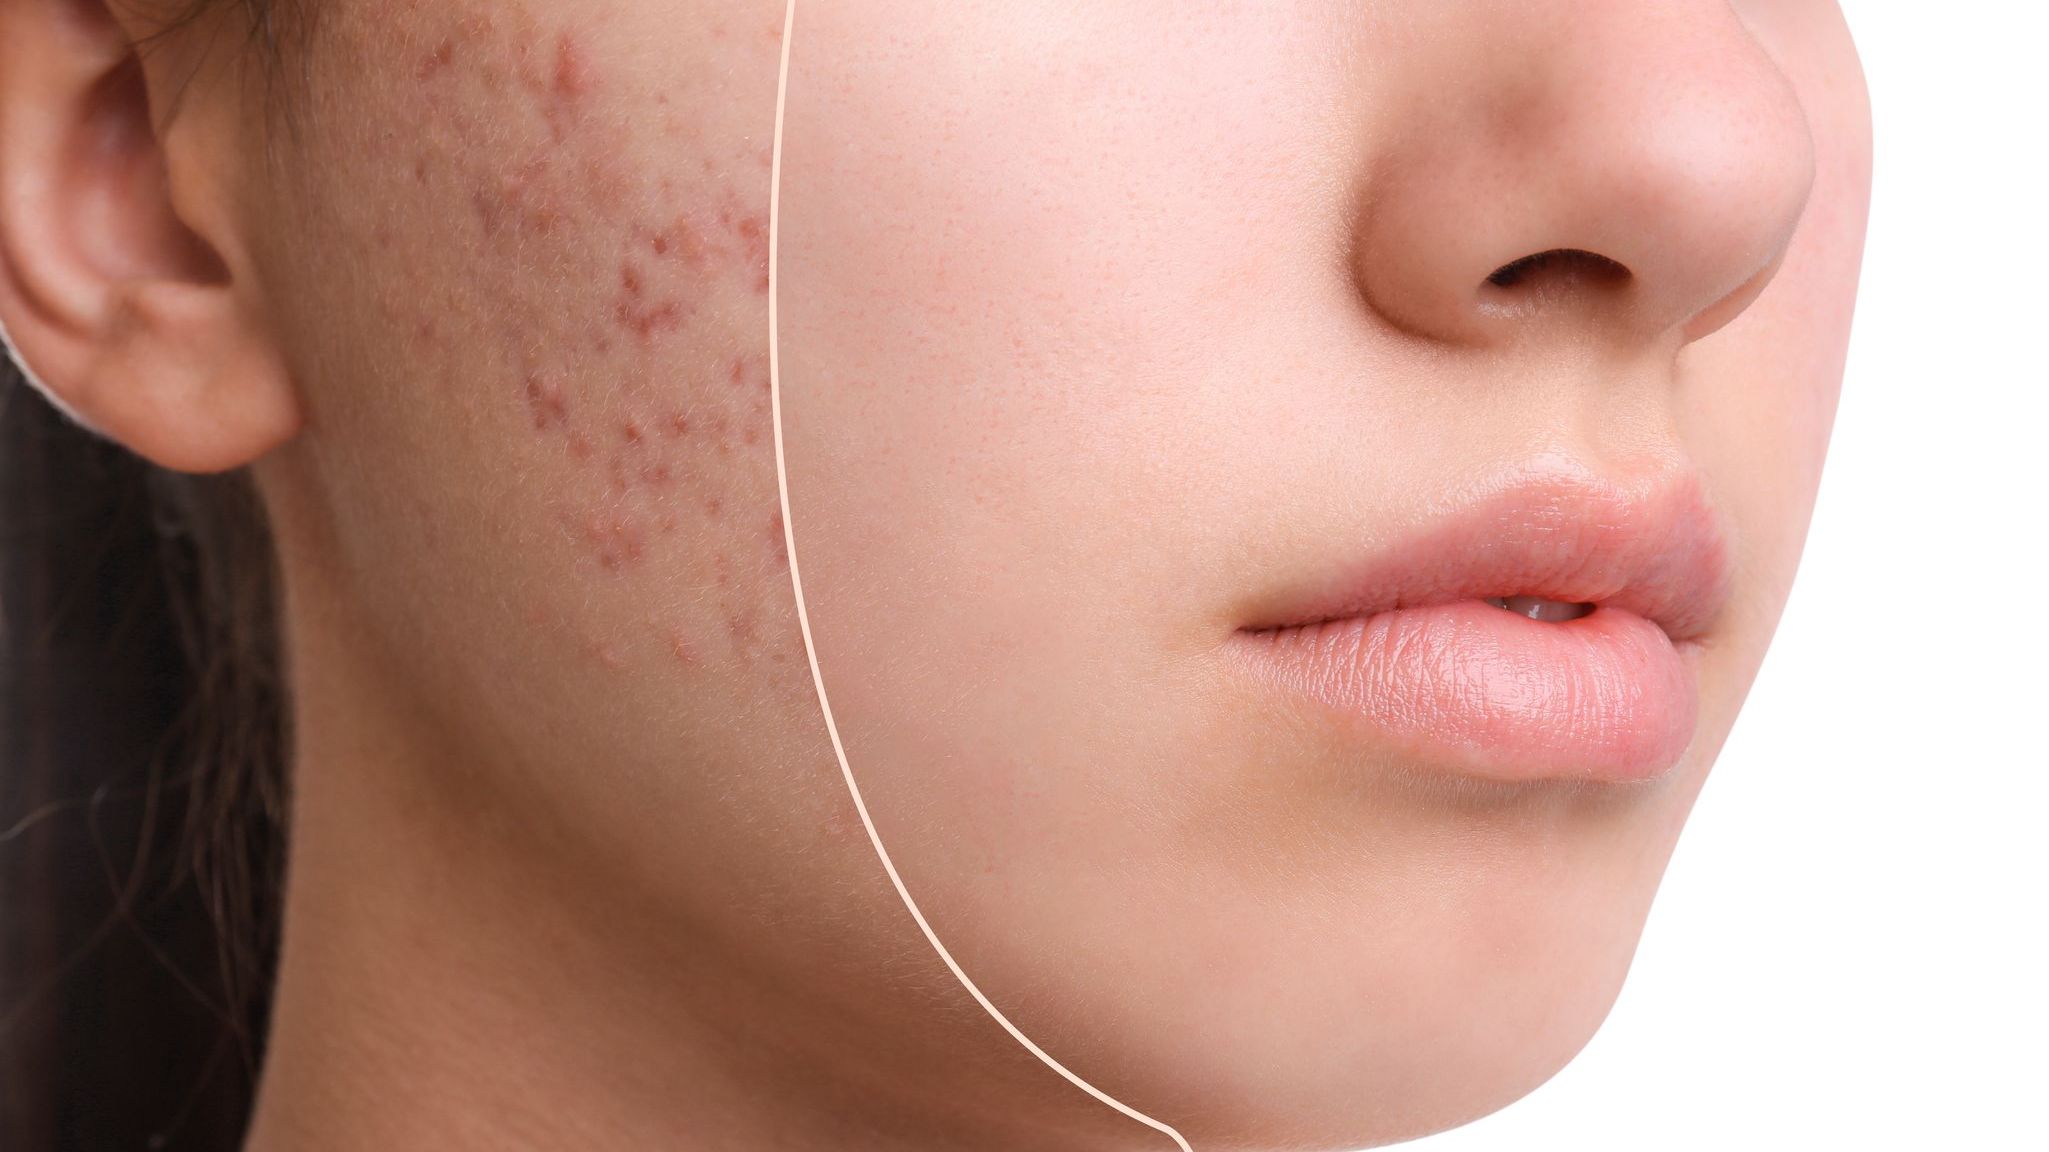 Acne and Acne Scarring